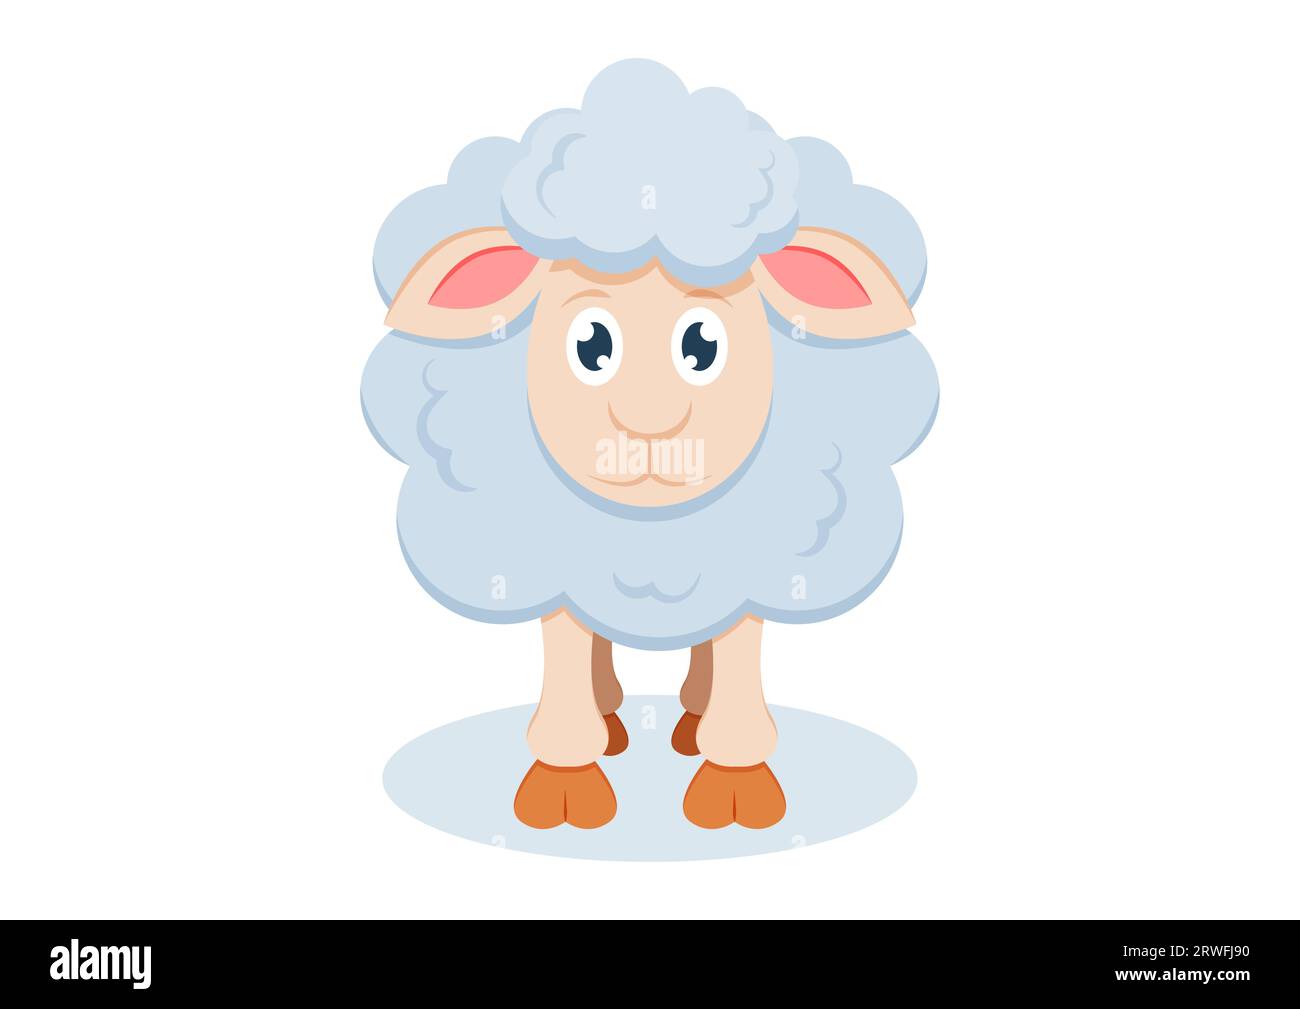 Sheep Cartoon Character Vector Flat Design Isolated on White Background Stock Vector